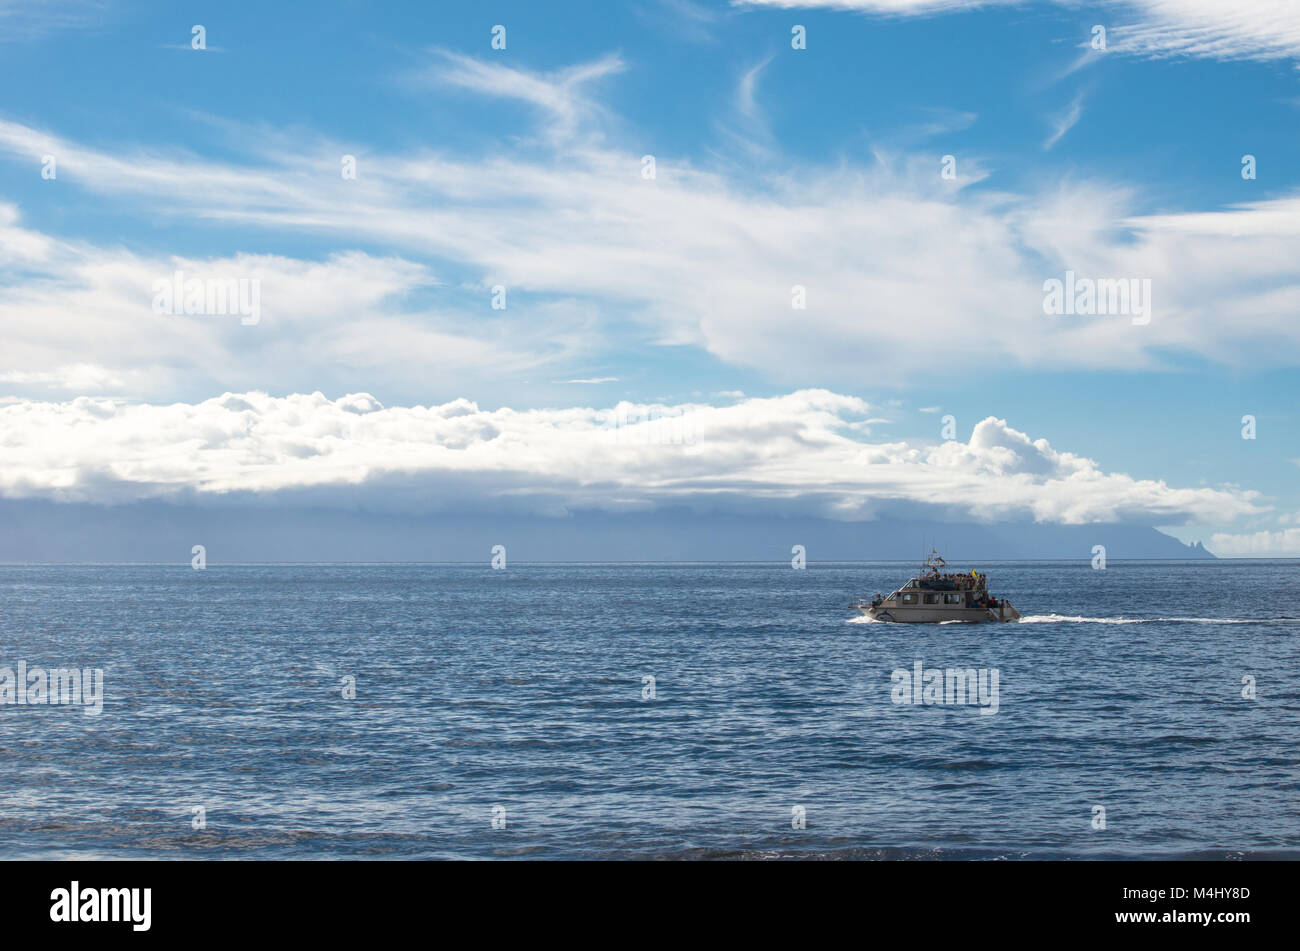 A boat with tourists on the Atlantic Ocean with the island of La Gomera in the background in the Canary Islands. View from Tenerife Stock Photo